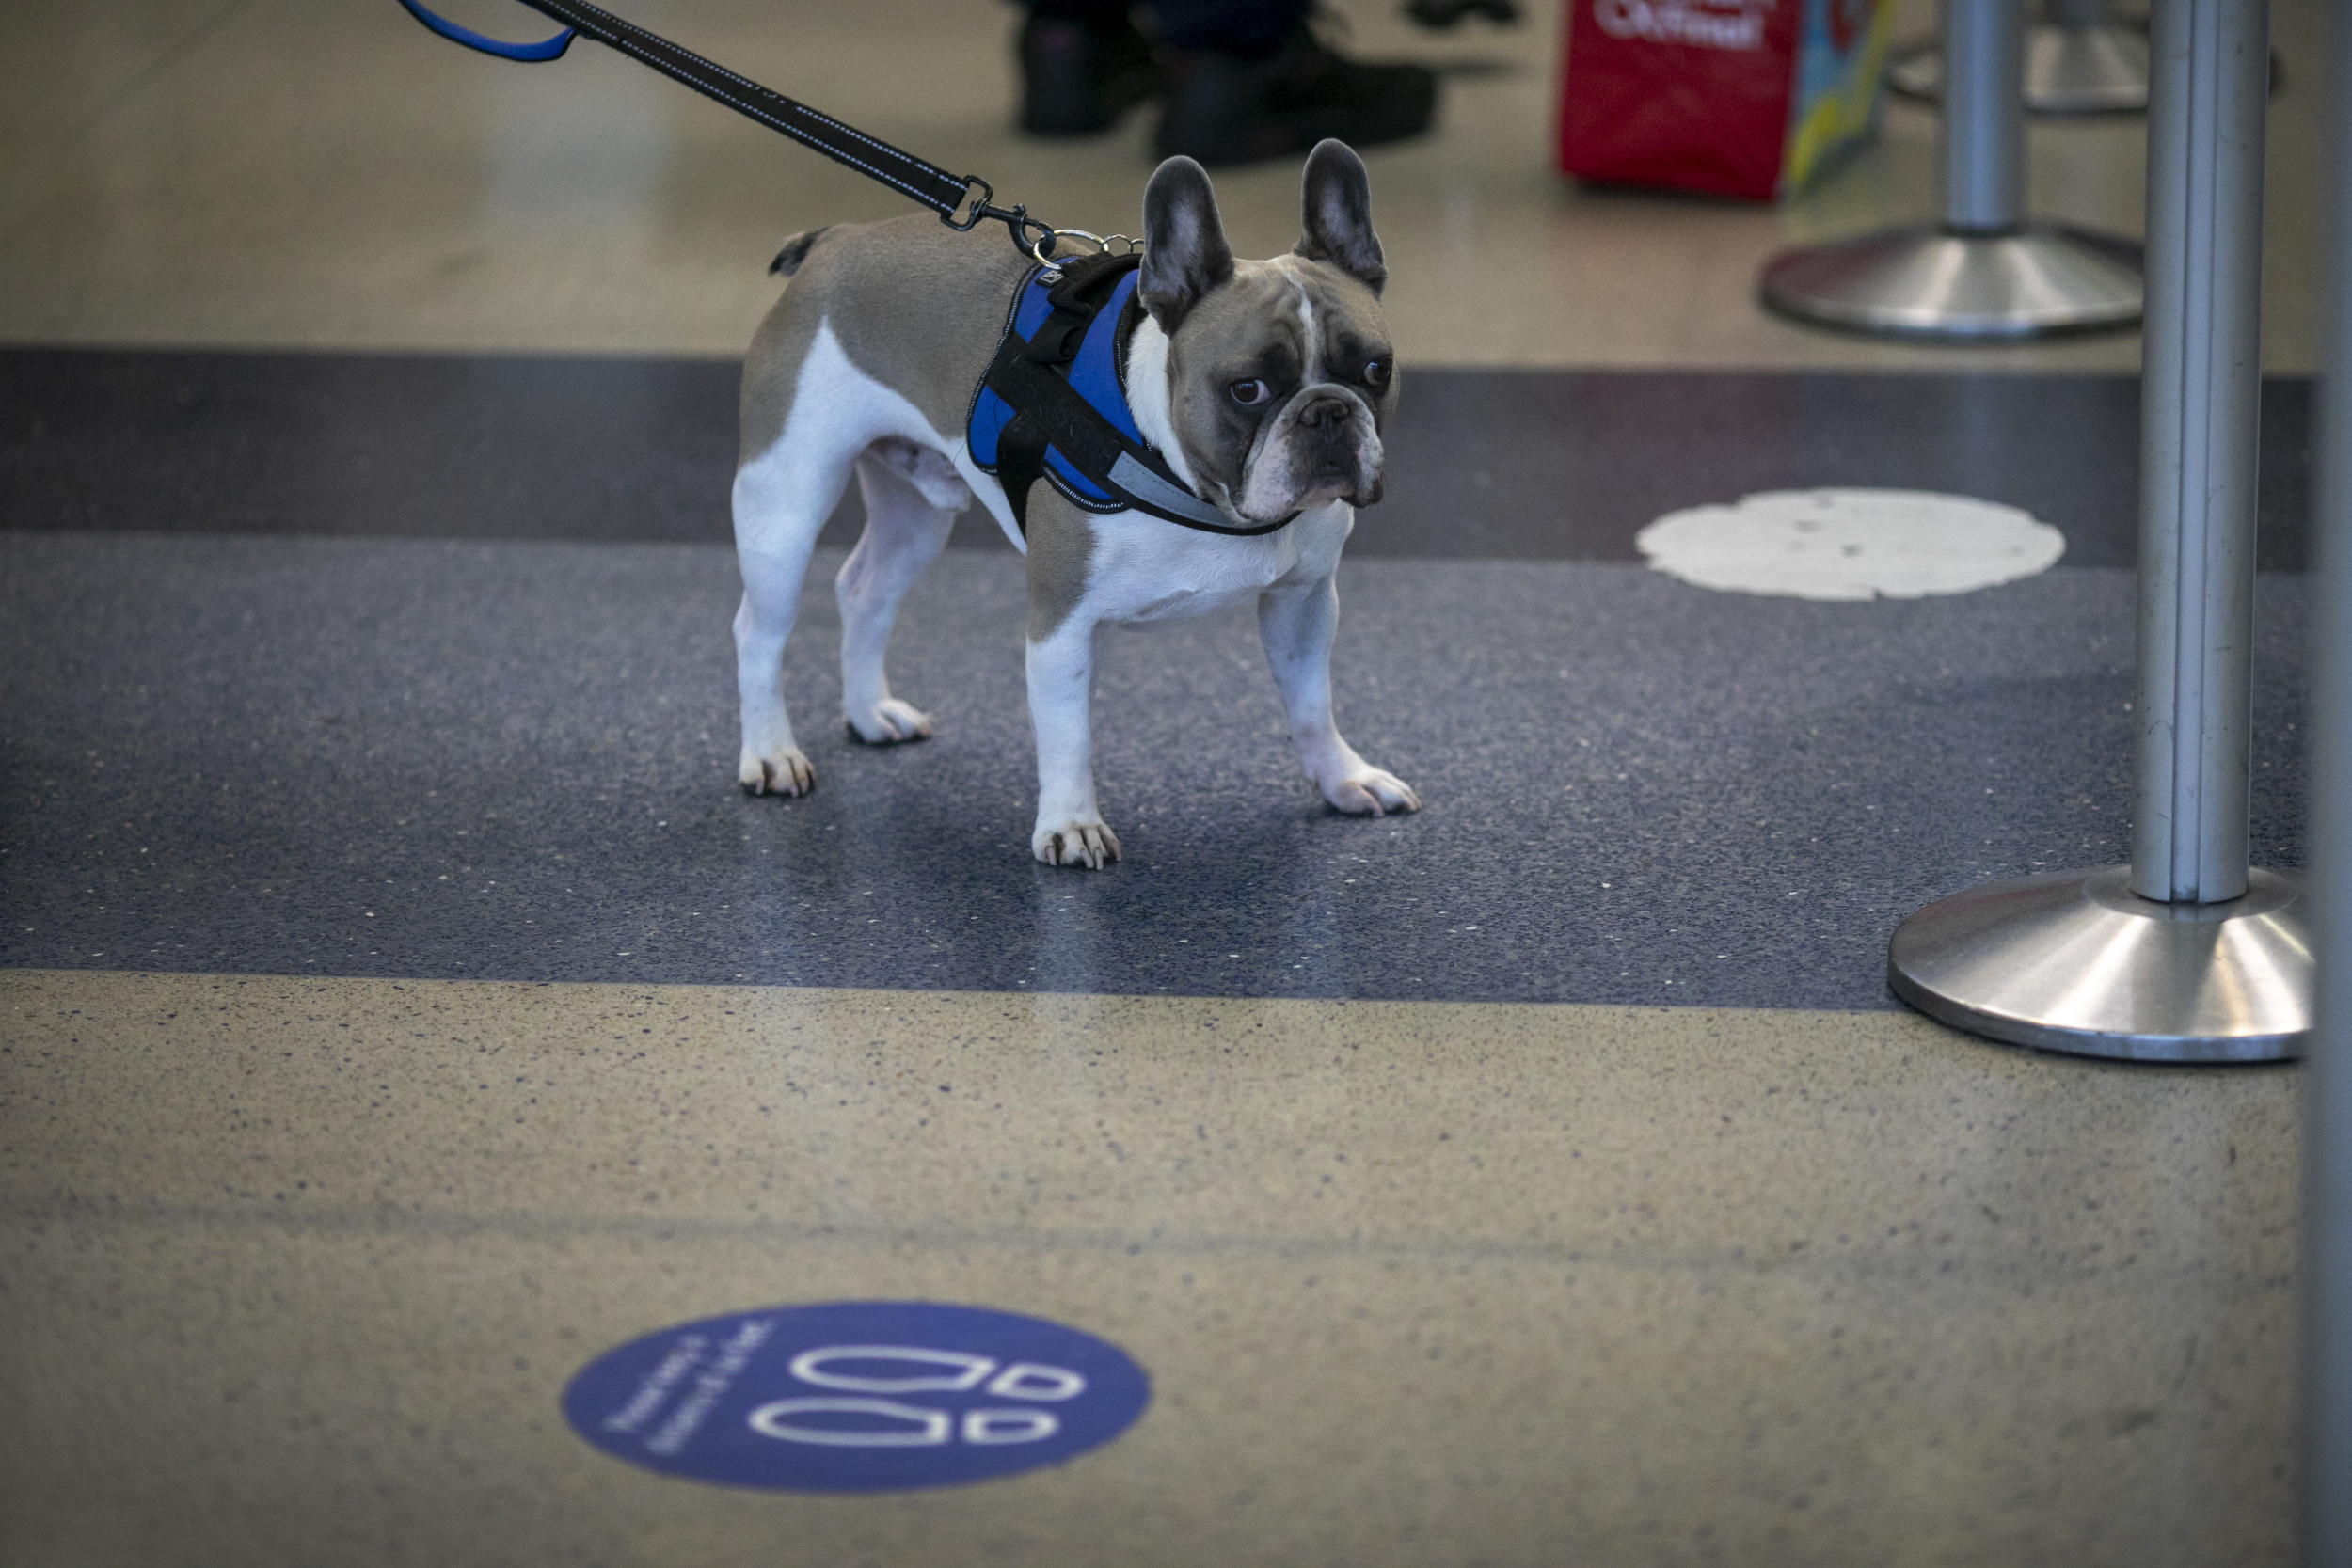 Should Emotional Support Animals Be Allowed on Planes? New Rule Says No